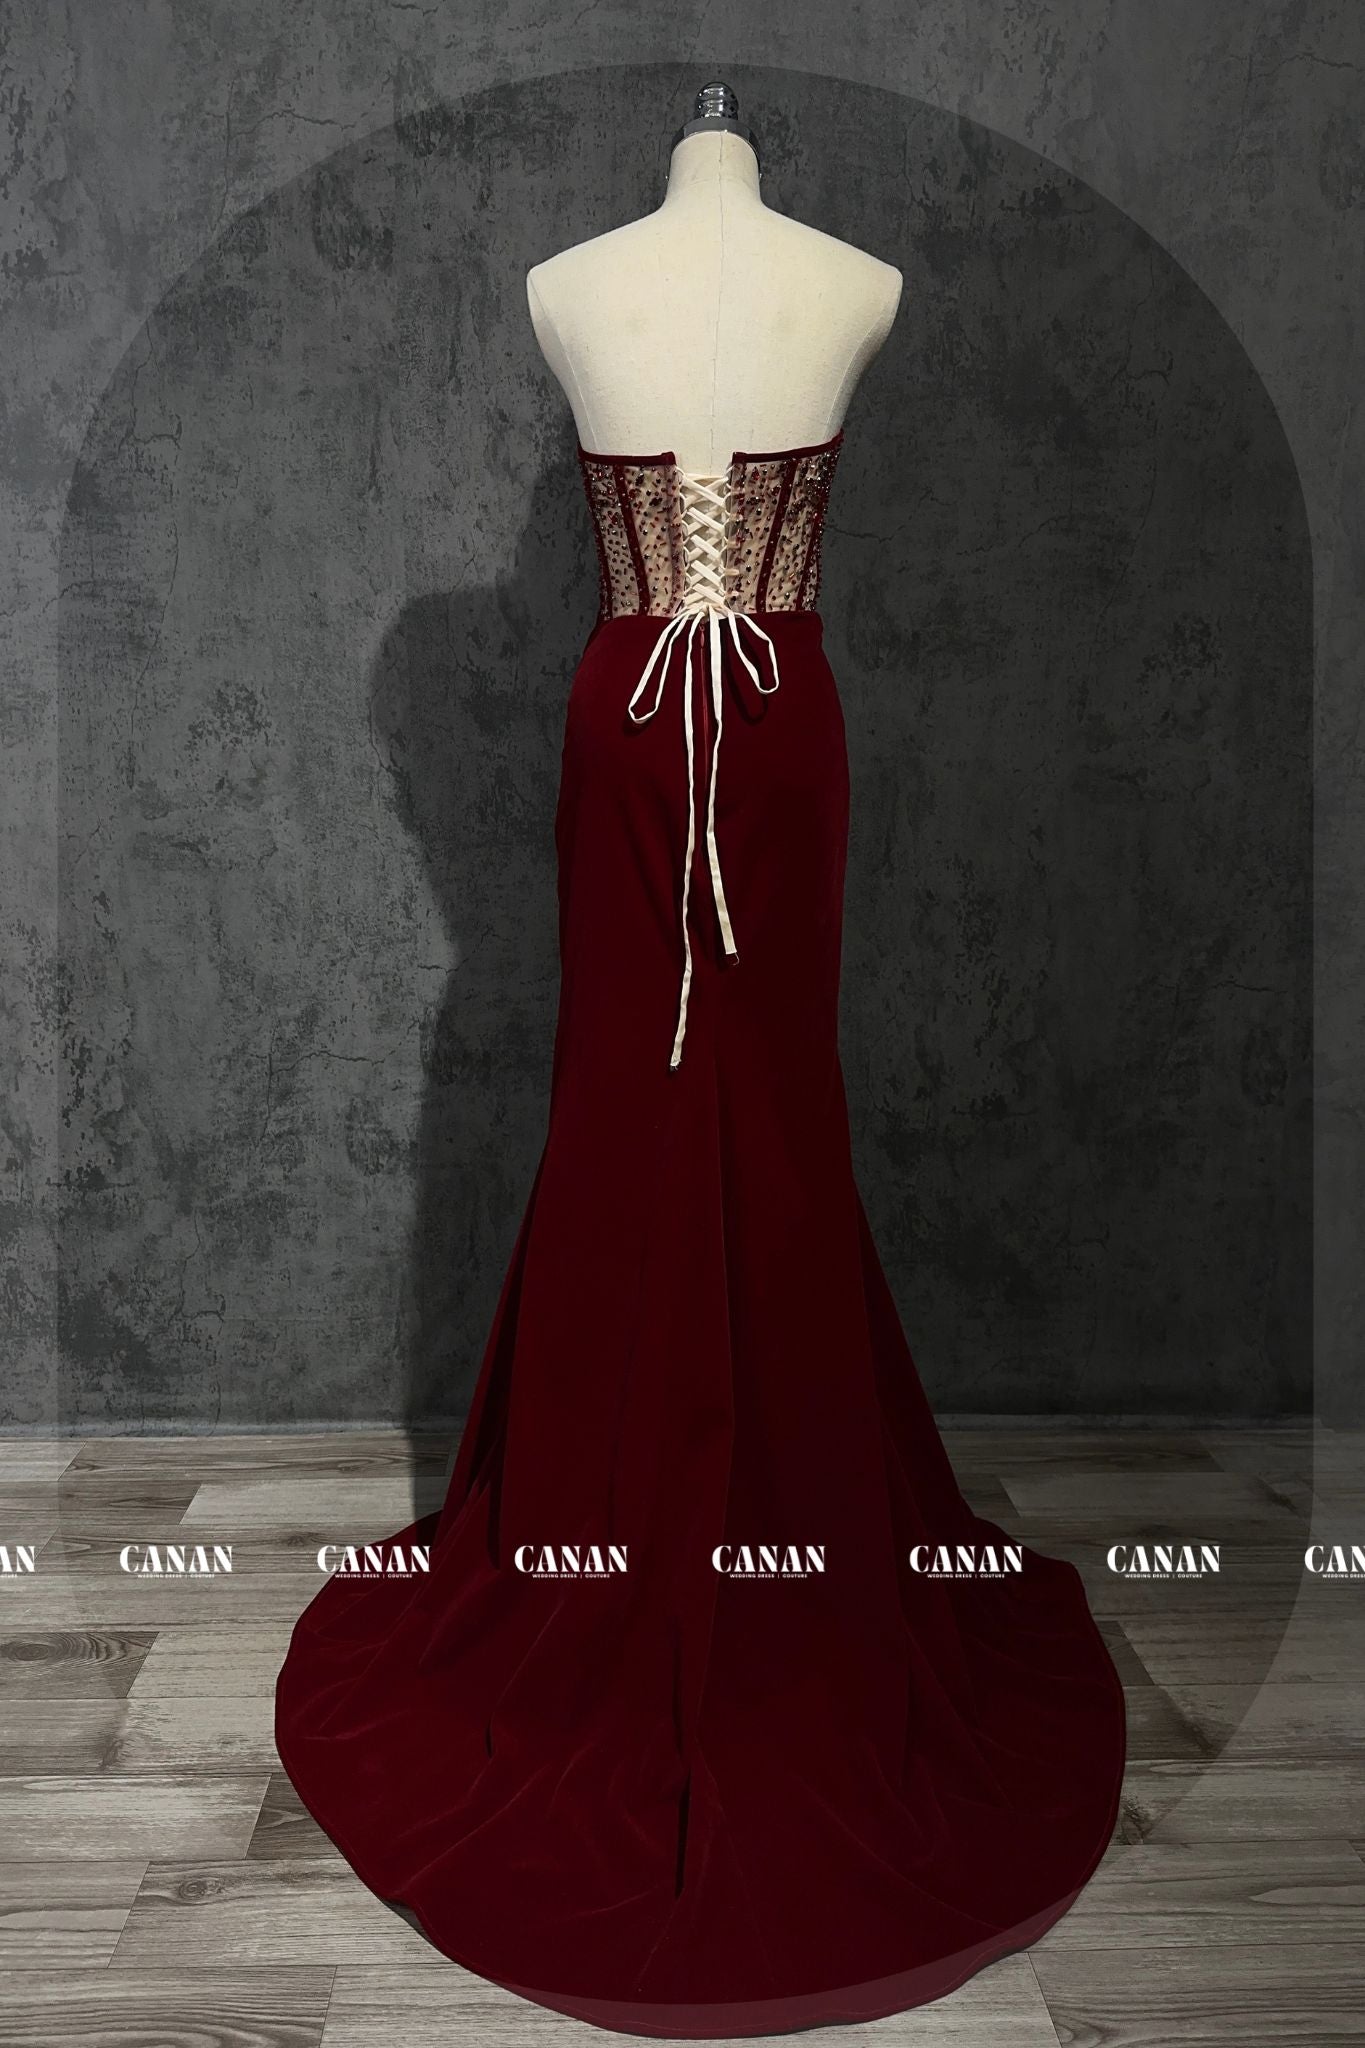 Kaytlyn - Allure and Elegance Combined: Sexy Mermaid Corset Prom Dress